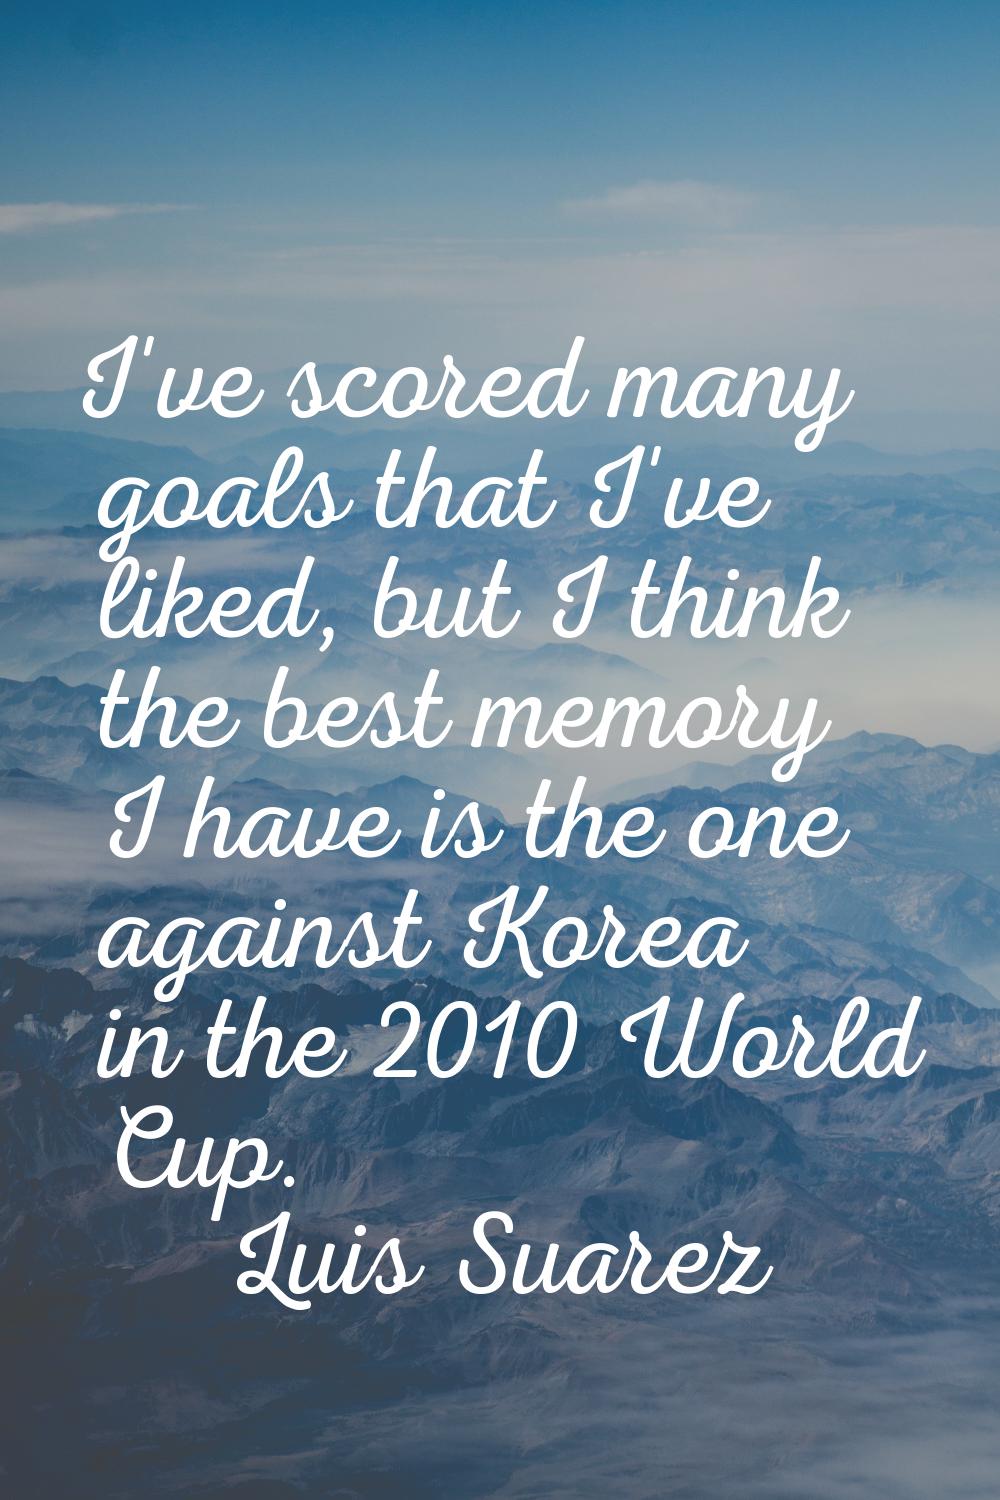 I've scored many goals that I've liked, but I think the best memory I have is the one against Korea